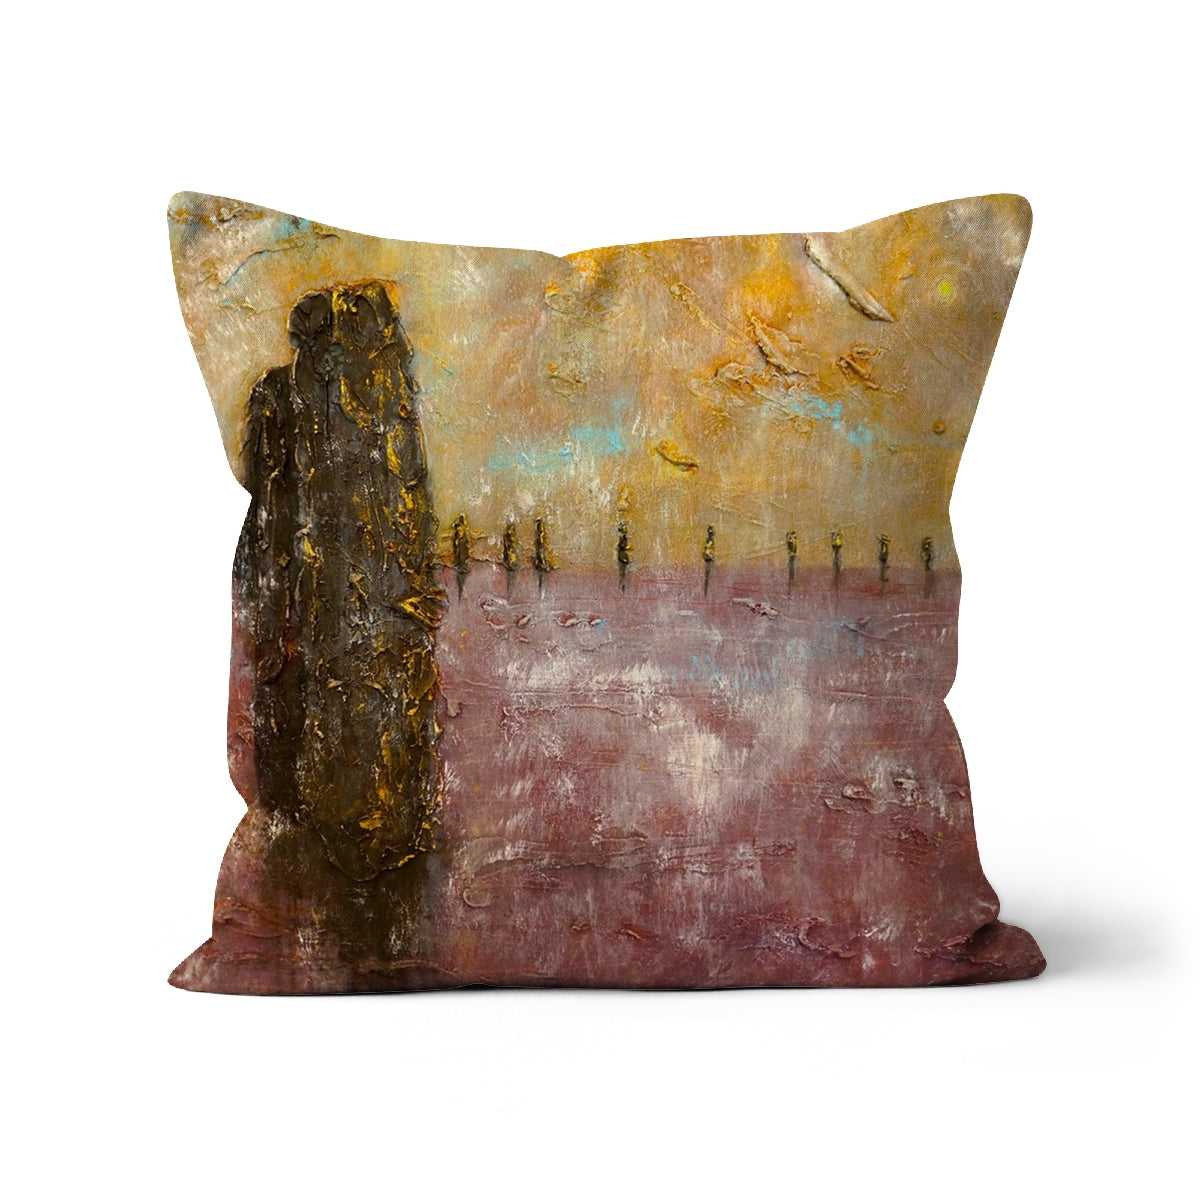 Bordgar Mist Orkney Art Gifts Cushion-Cushions-Orkney Art Gallery-Canvas-24"x24"-Paintings, Prints, Homeware, Art Gifts From Scotland By Scottish Artist Kevin Hunter